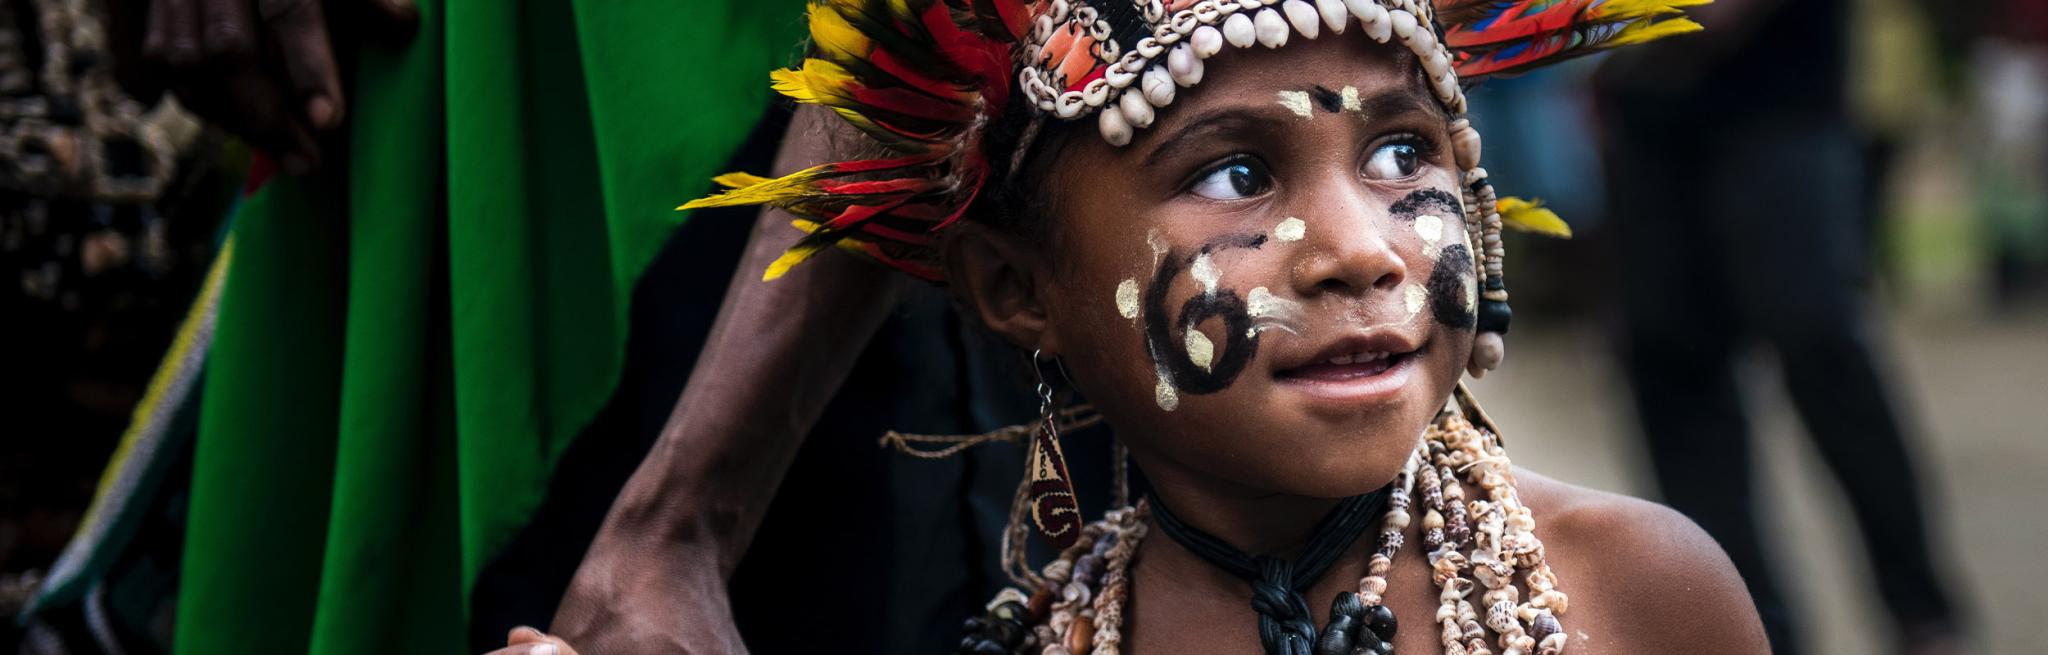 A child from Papua New Guinea